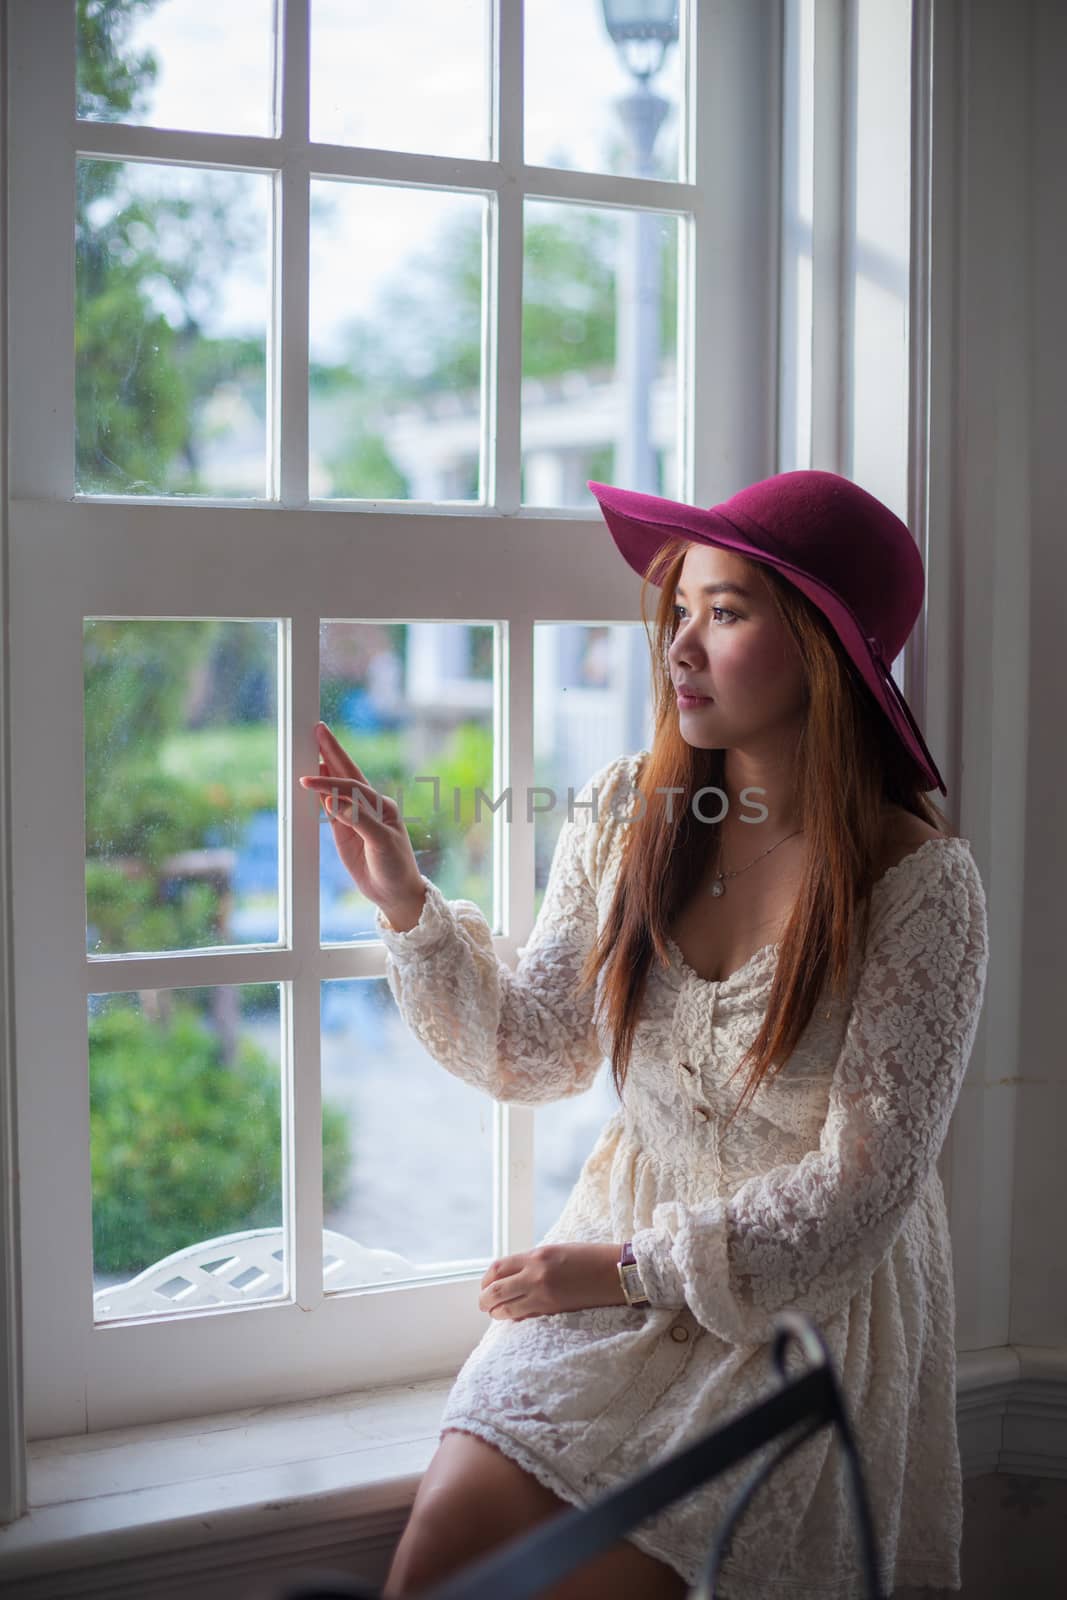 Sad asian vintage woman on the window looking out the window